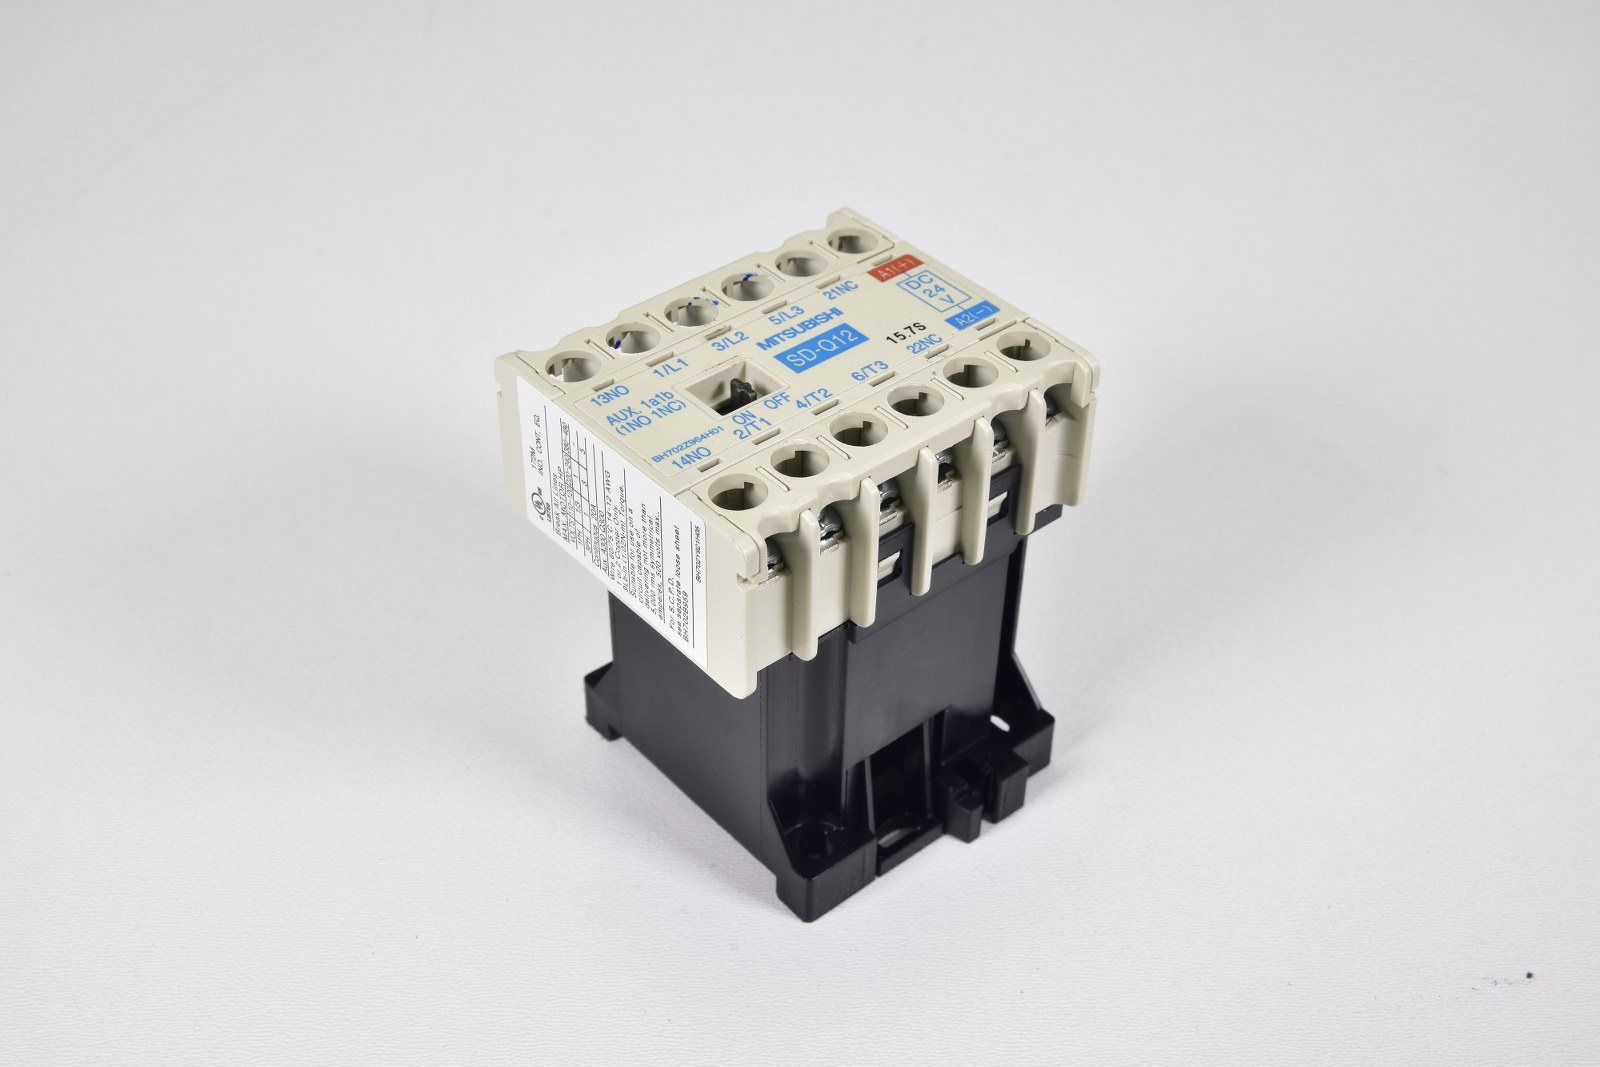 1PC NEW FOR MITSUBISHI Electric Contactor SD-QR12 24VDC #T212 YS